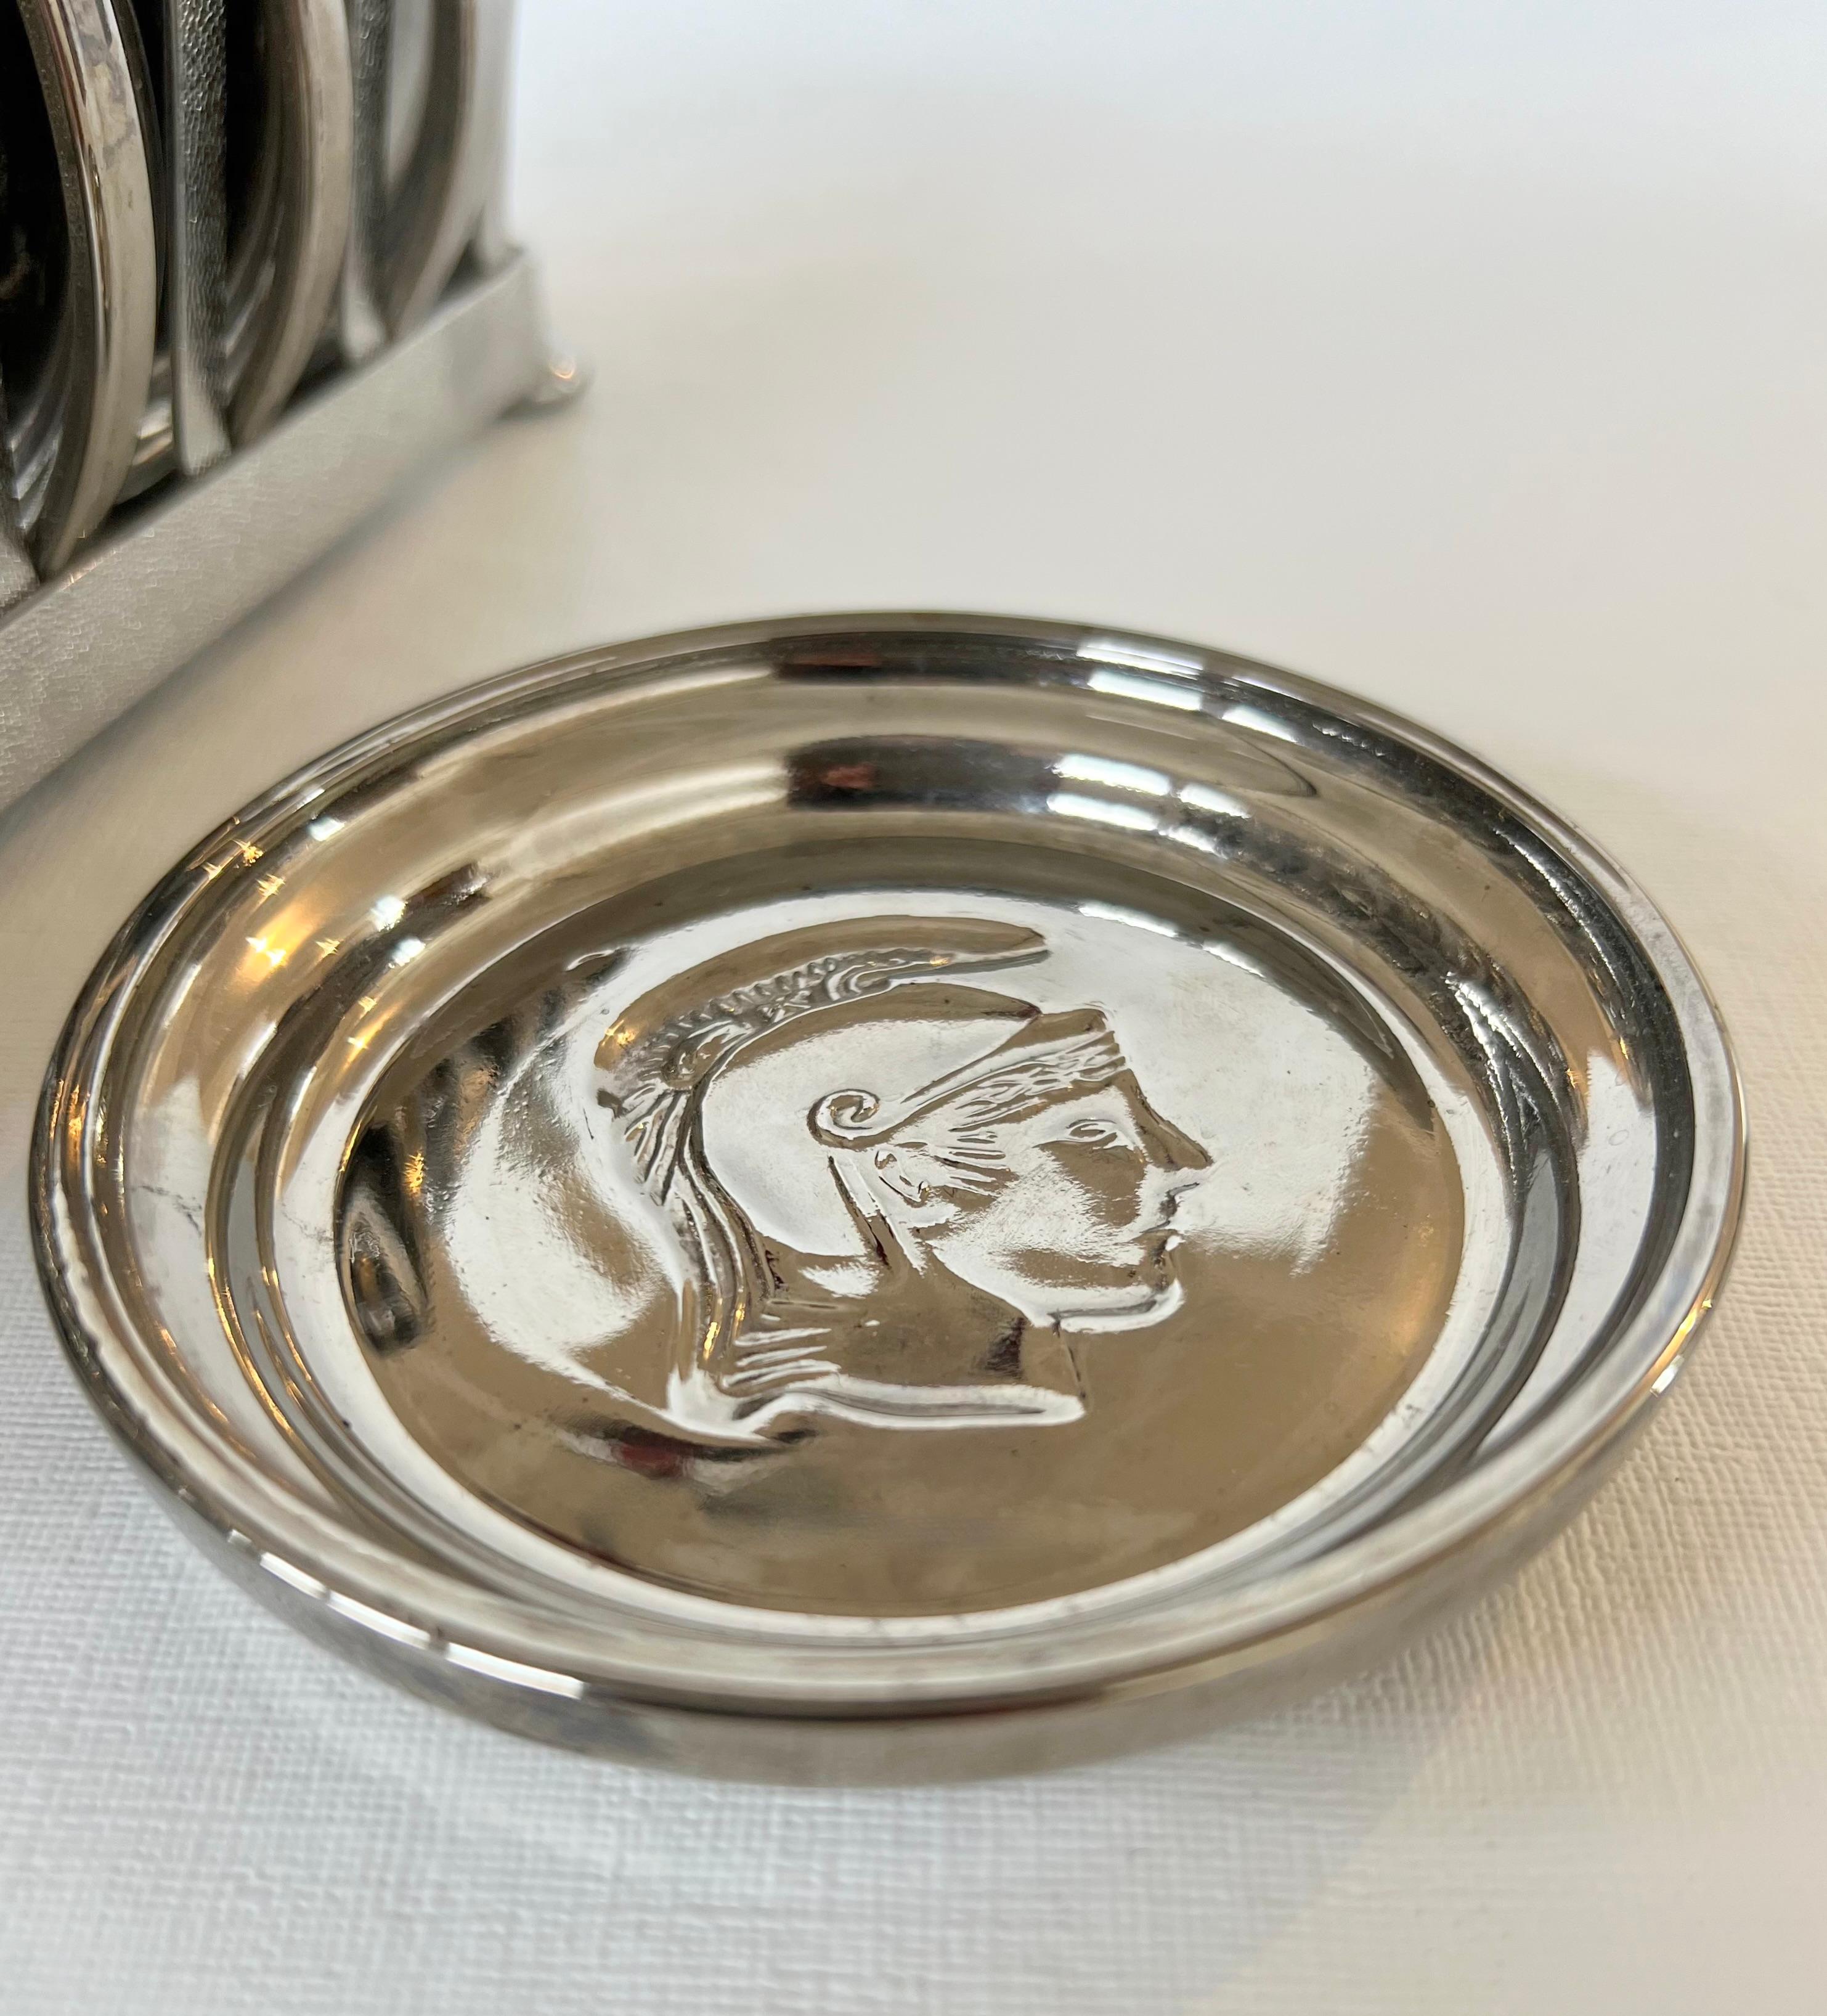 1960s Mercury Glass Roman Centurion Coasters in Caddy - 9 Pieces In Good Condition For Sale In Draper, UT